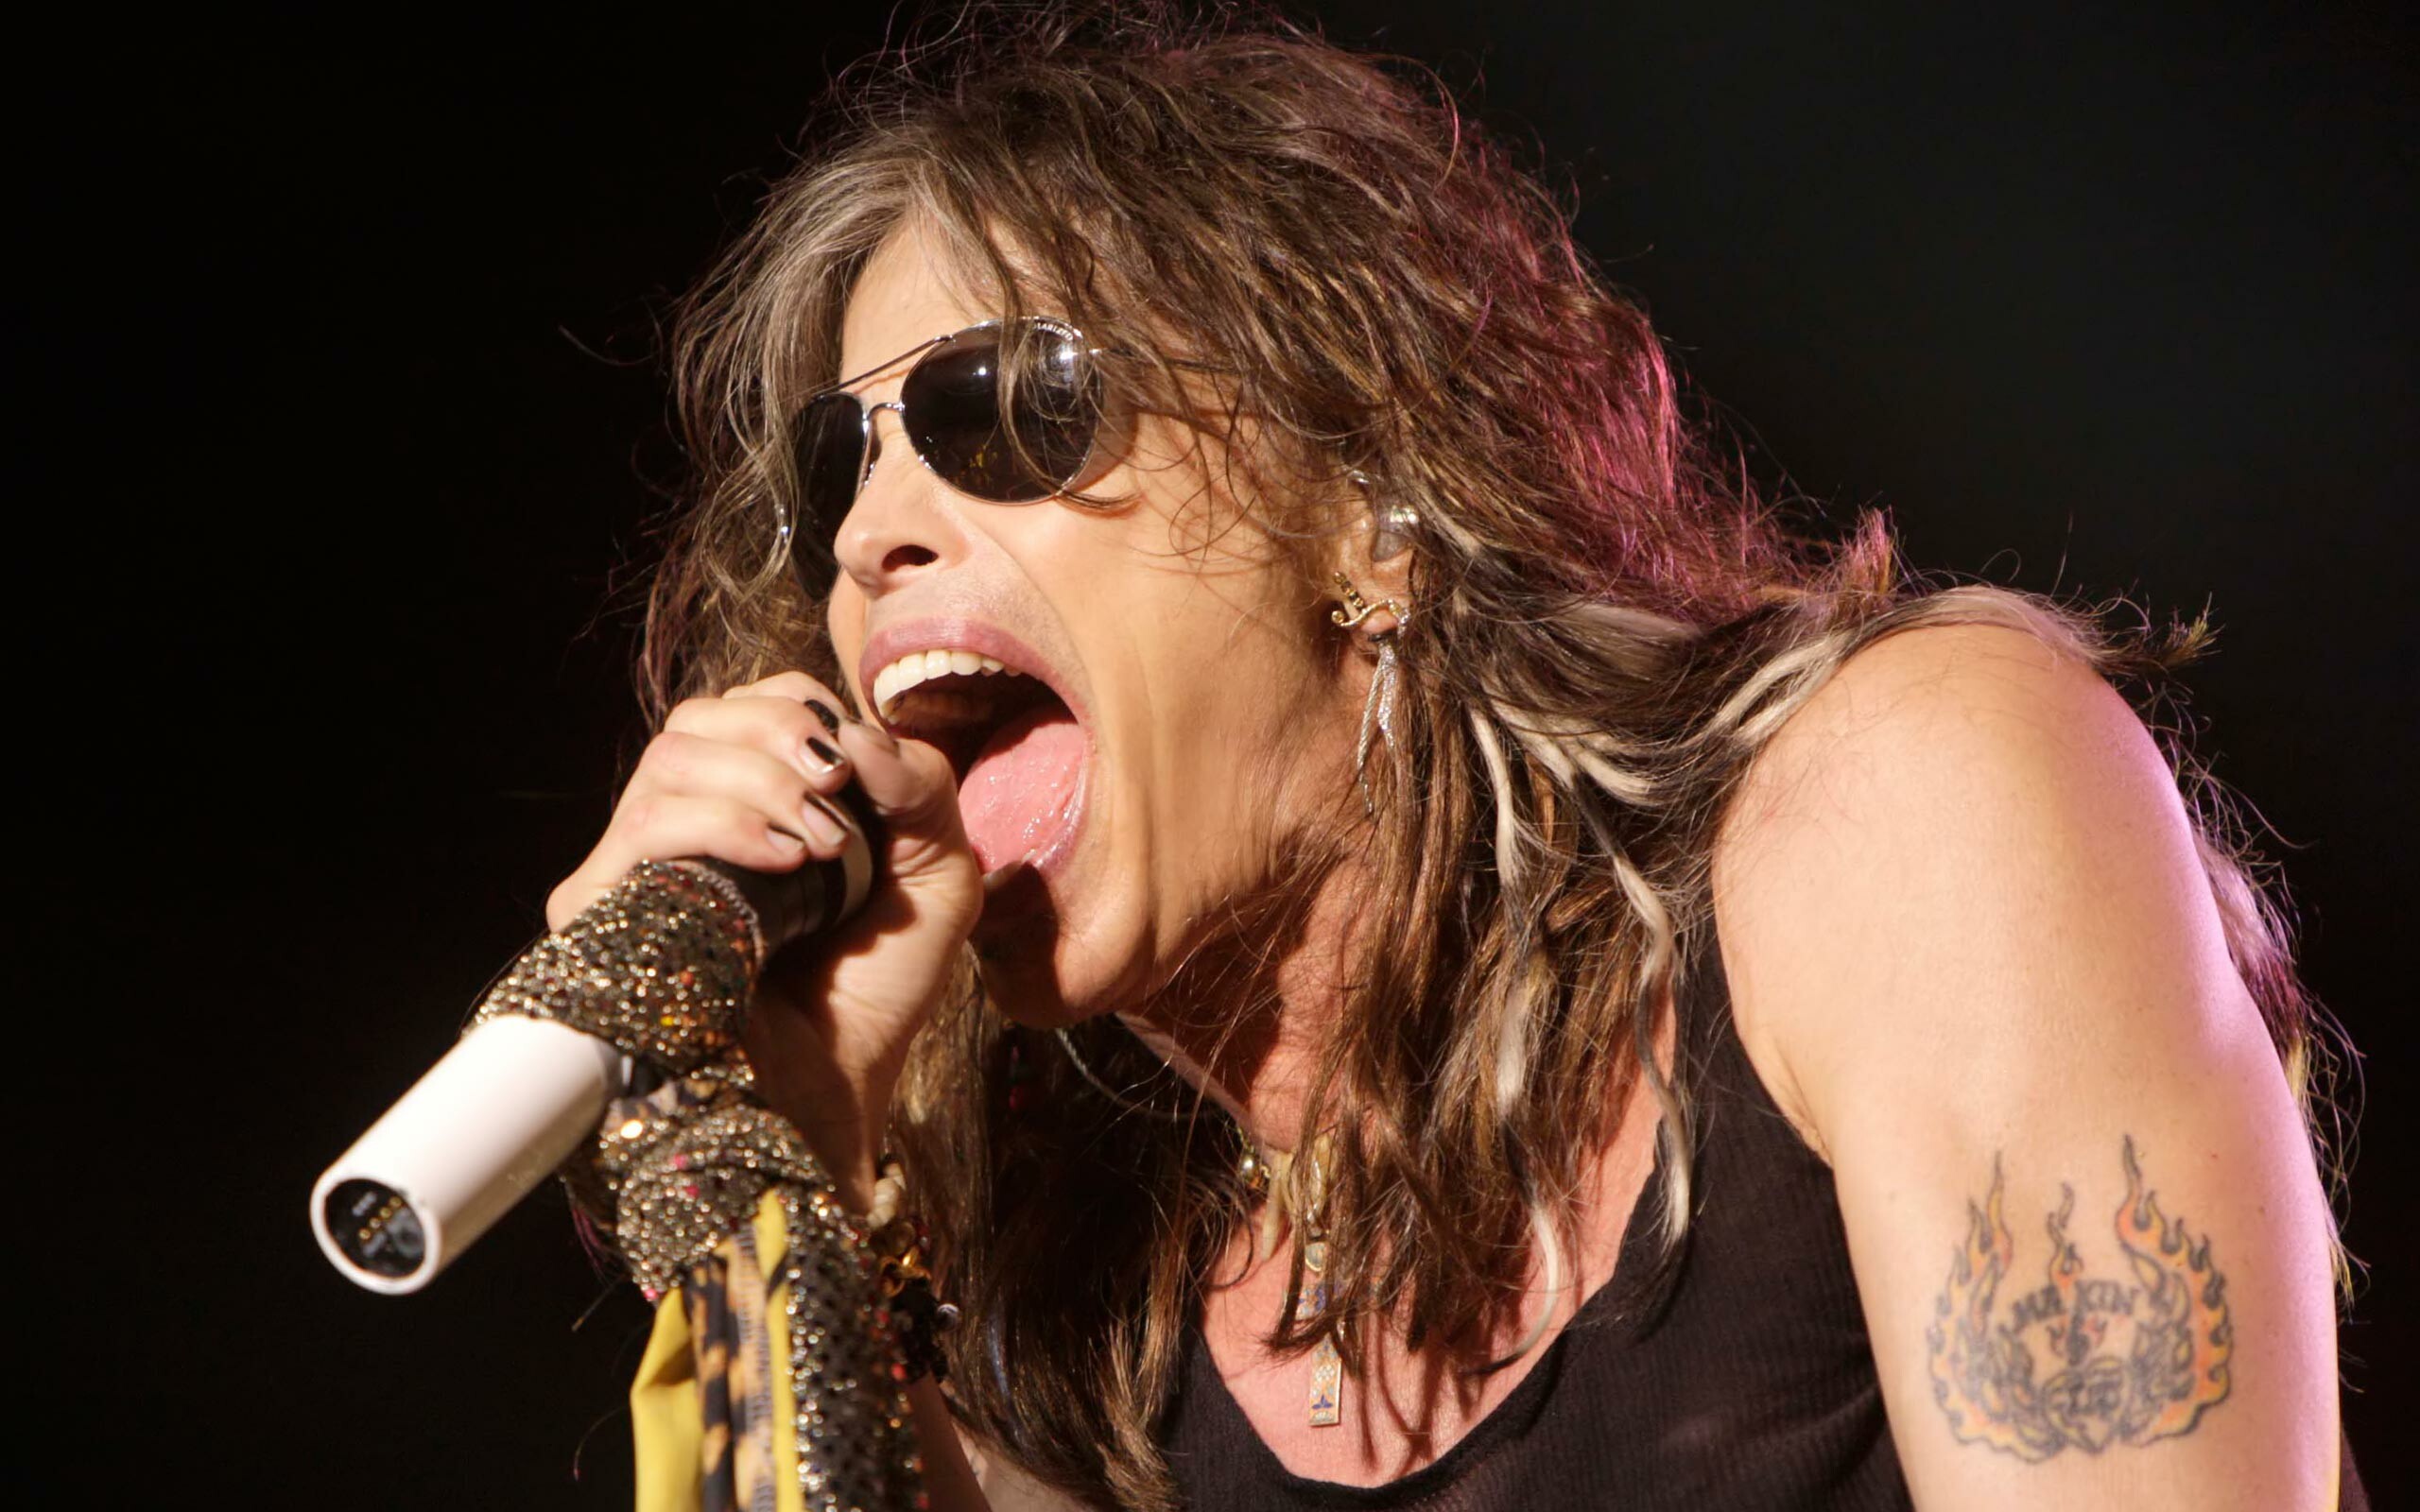 Aerosmith: Steven Tyler, was ranked third on Hit Parader's Top 100 Metal Vocalists of All Time. 2560x1600 HD Background.